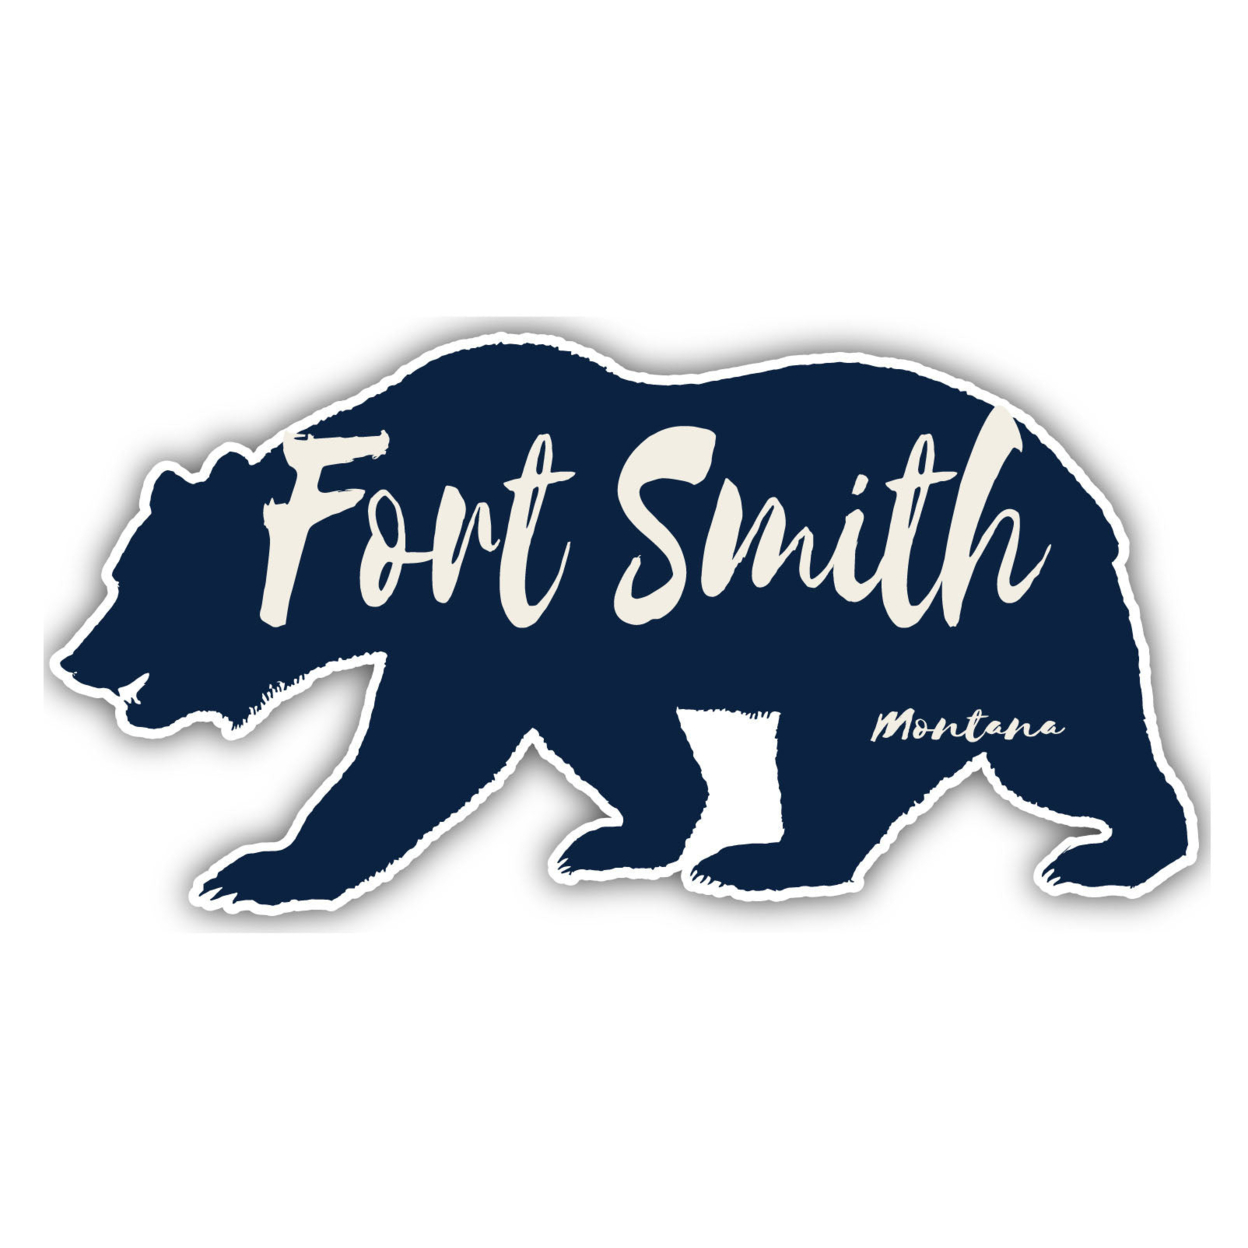 Fort Smith Montana Souvenir Decorative Stickers (Choose Theme And Size) - 4-Pack, 4-Inch, Adventures Awaits